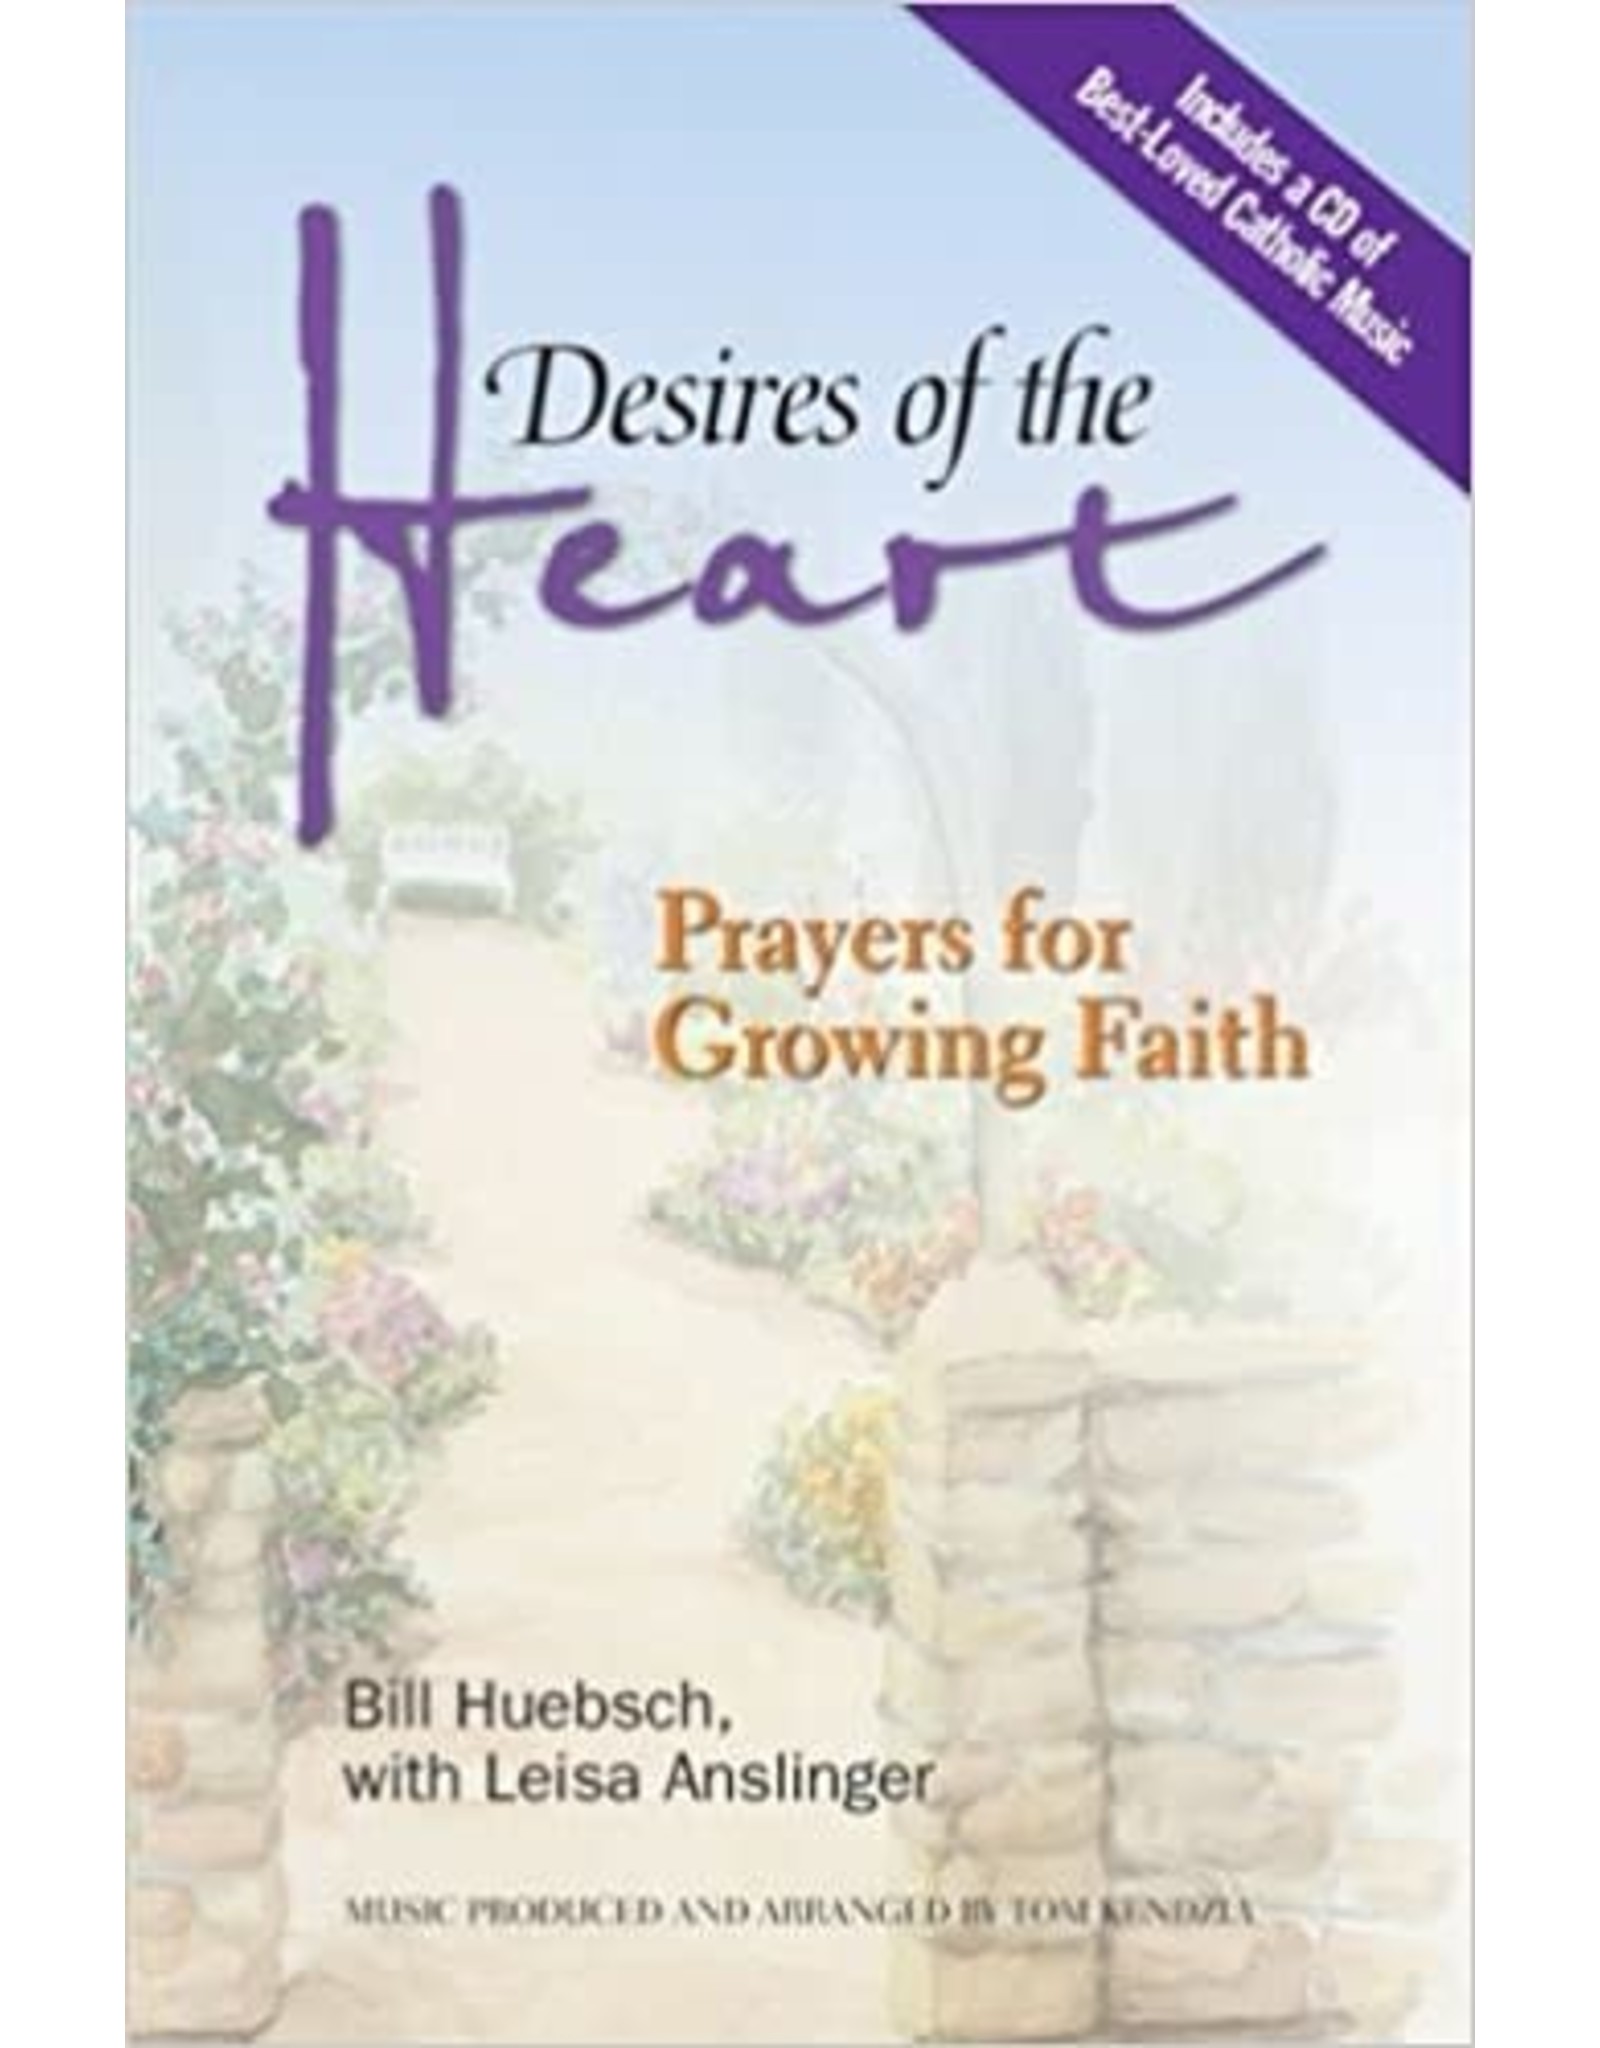 Twenty Third Publications Desires of the Heart Book with CD